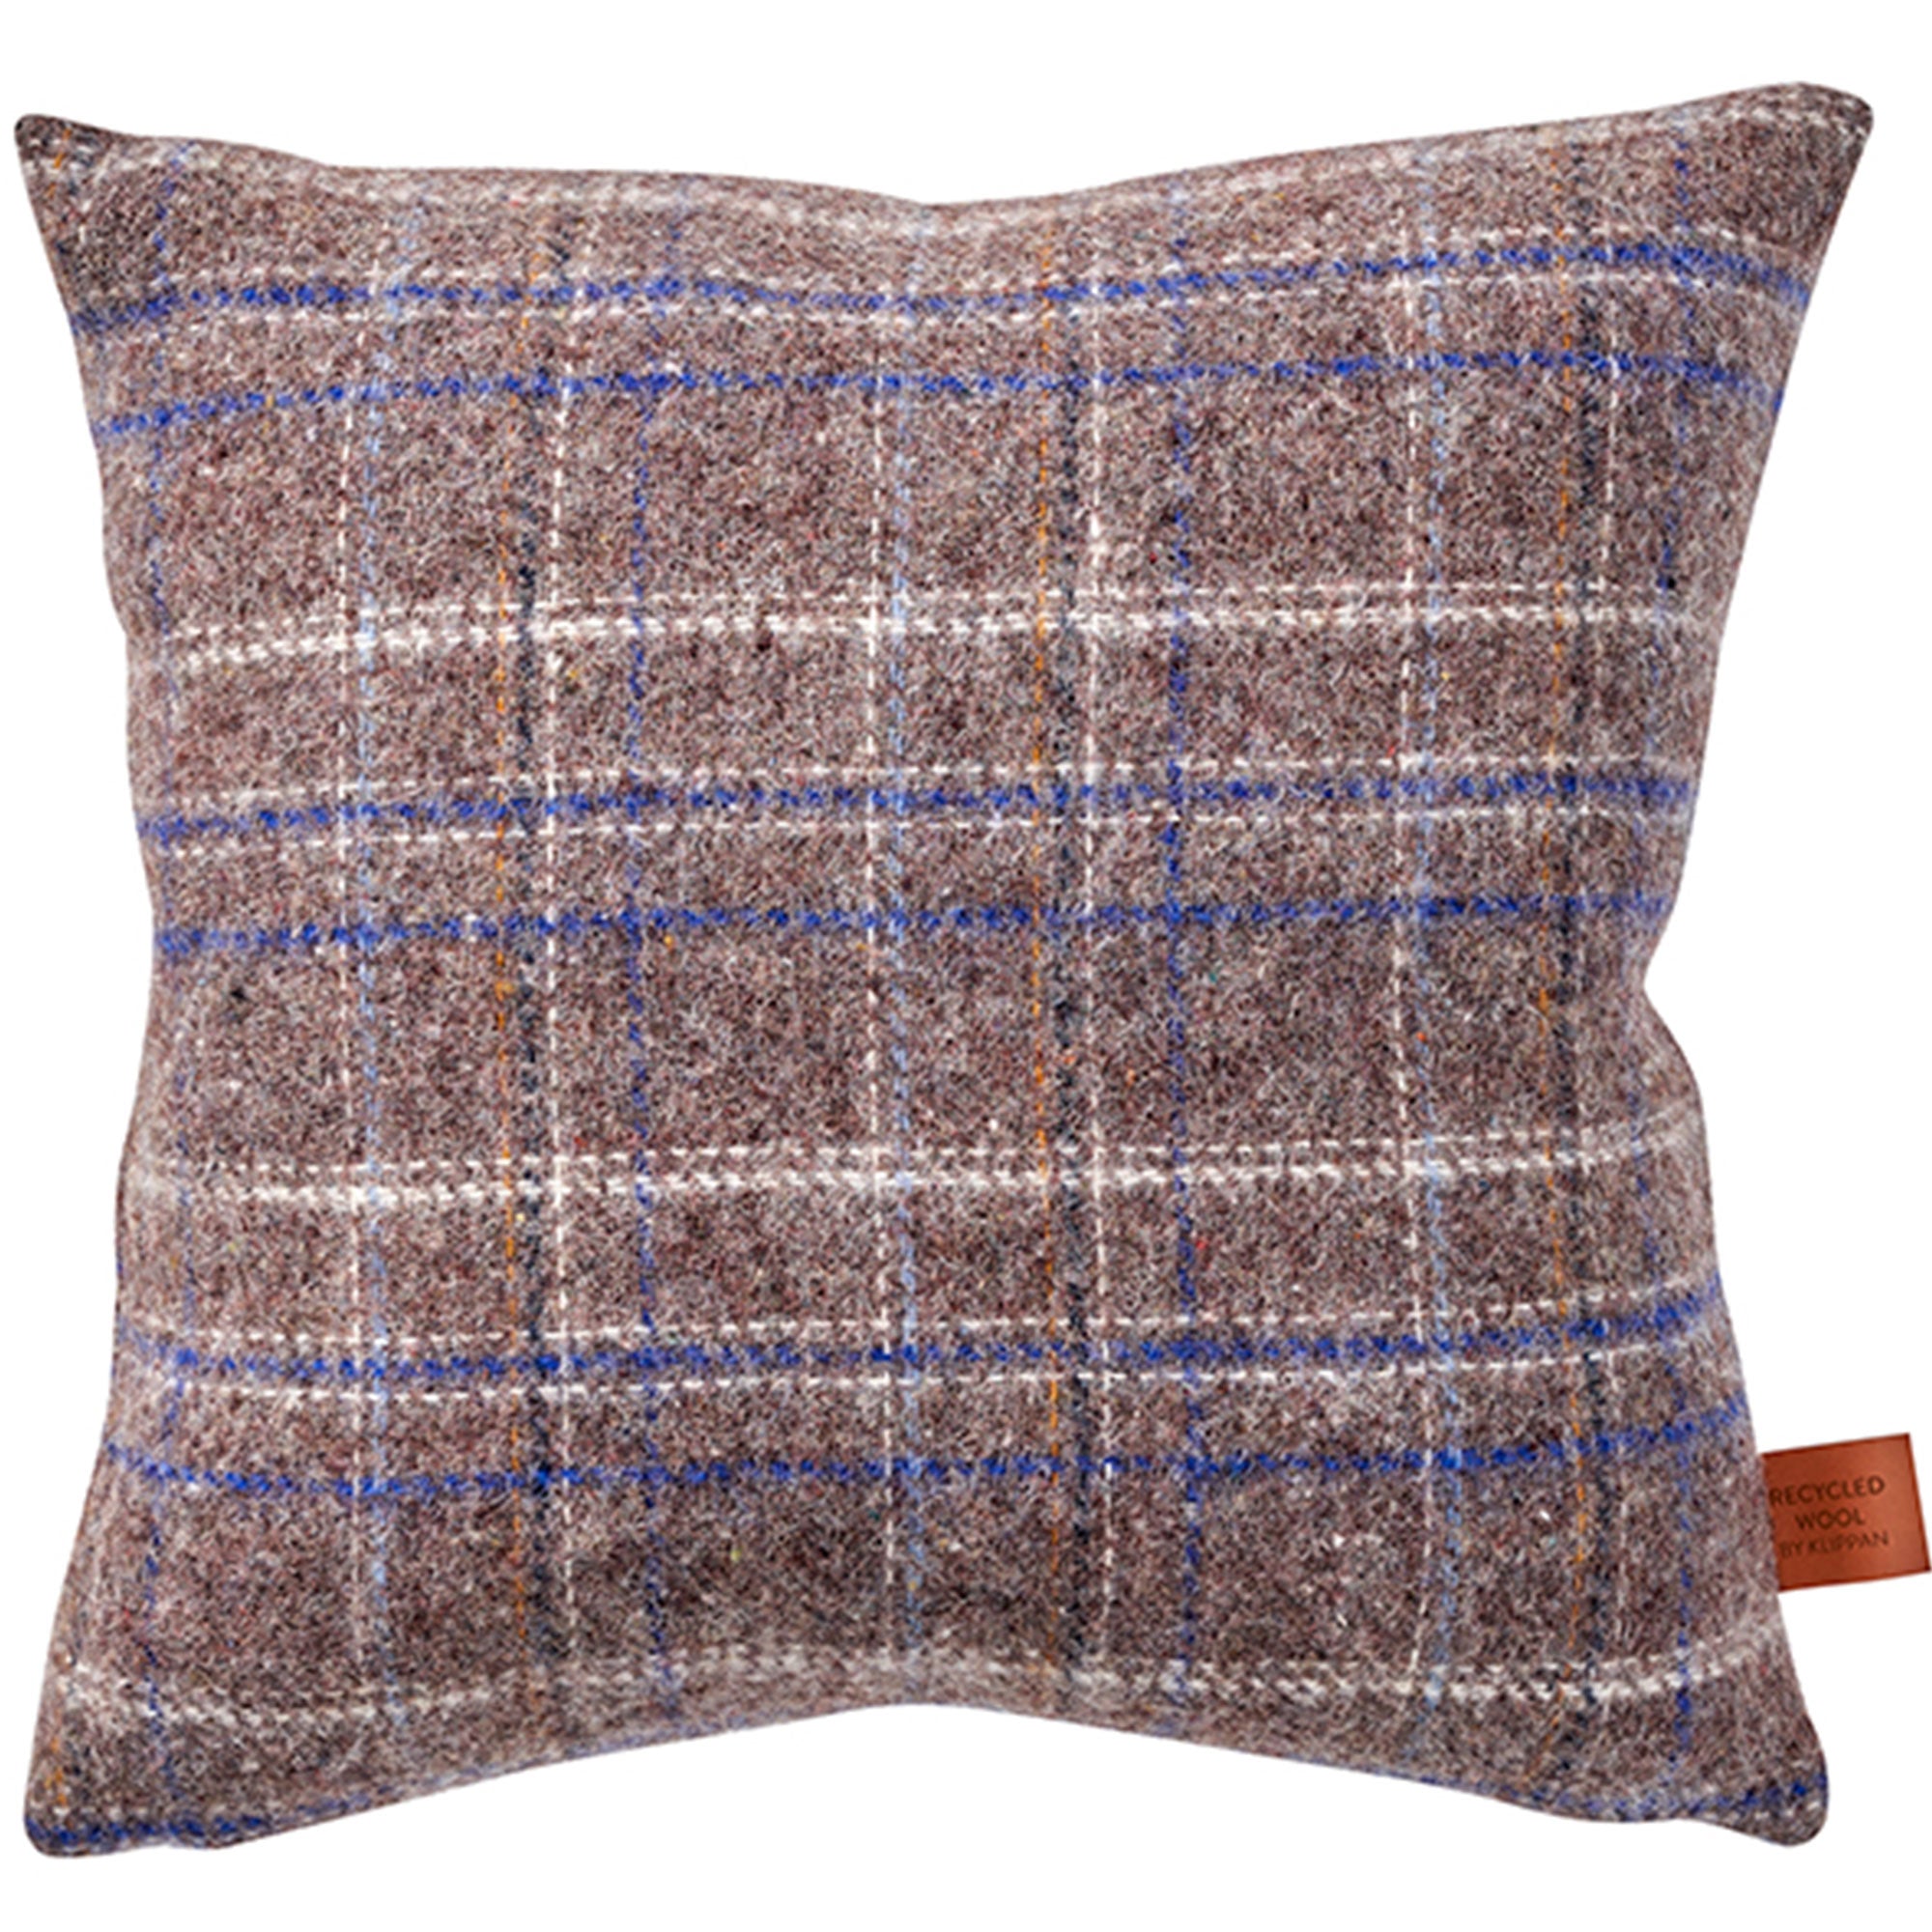 Square Brown & Blue 45x45cm Recycled Lambswool Cushion Cover